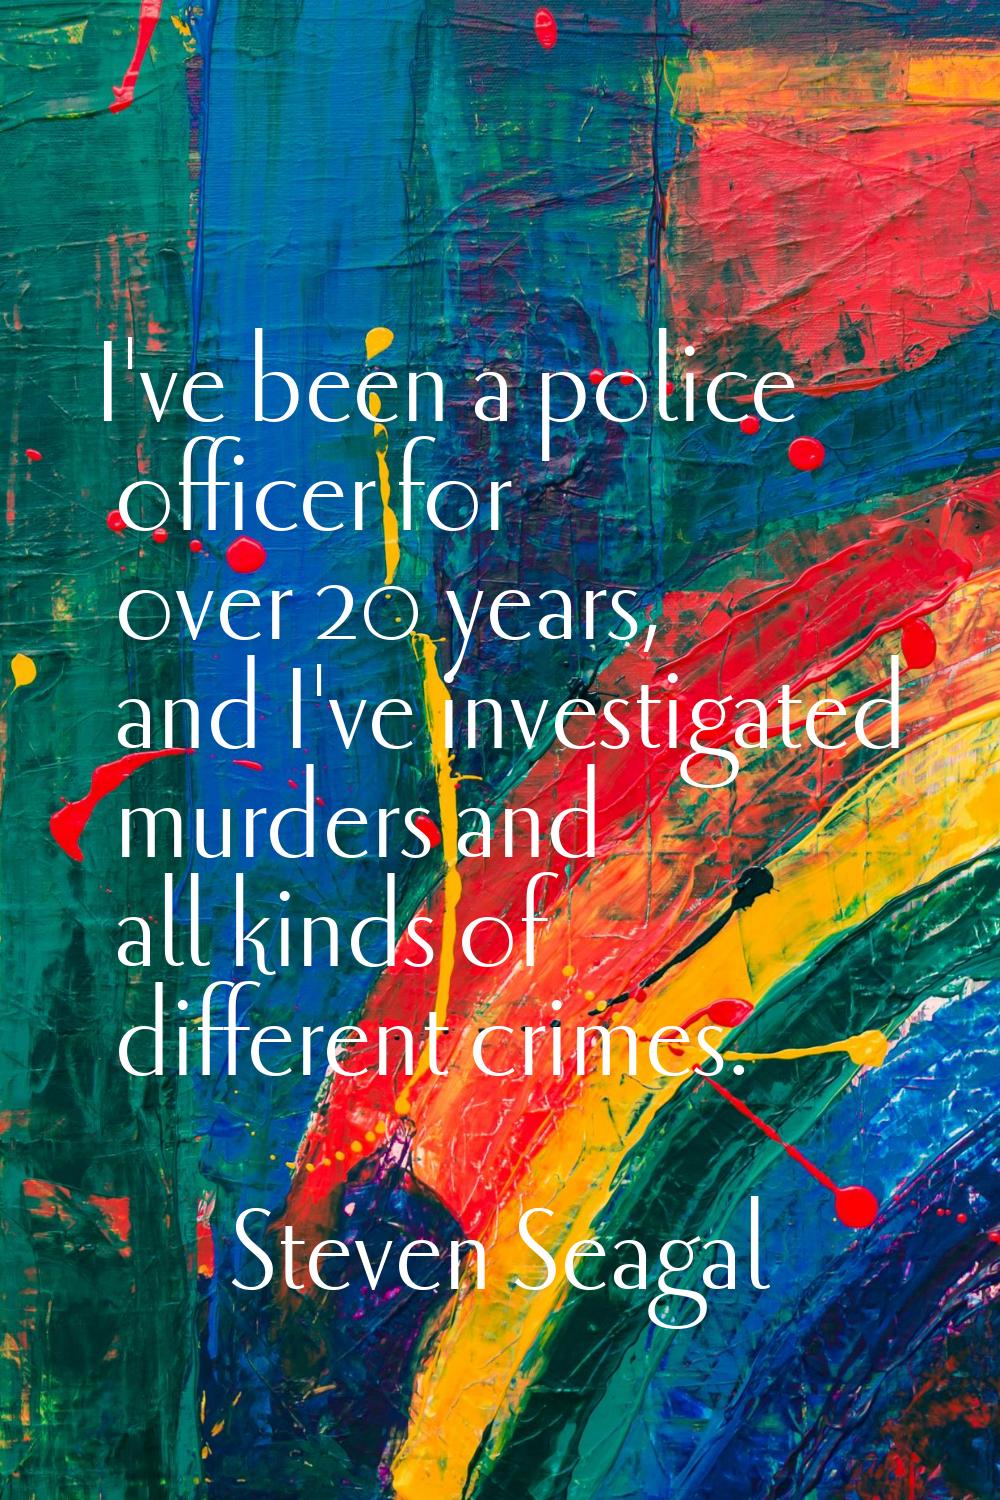 I've been a police officer for over 20 years, and I've investigated murders and all kinds of differ